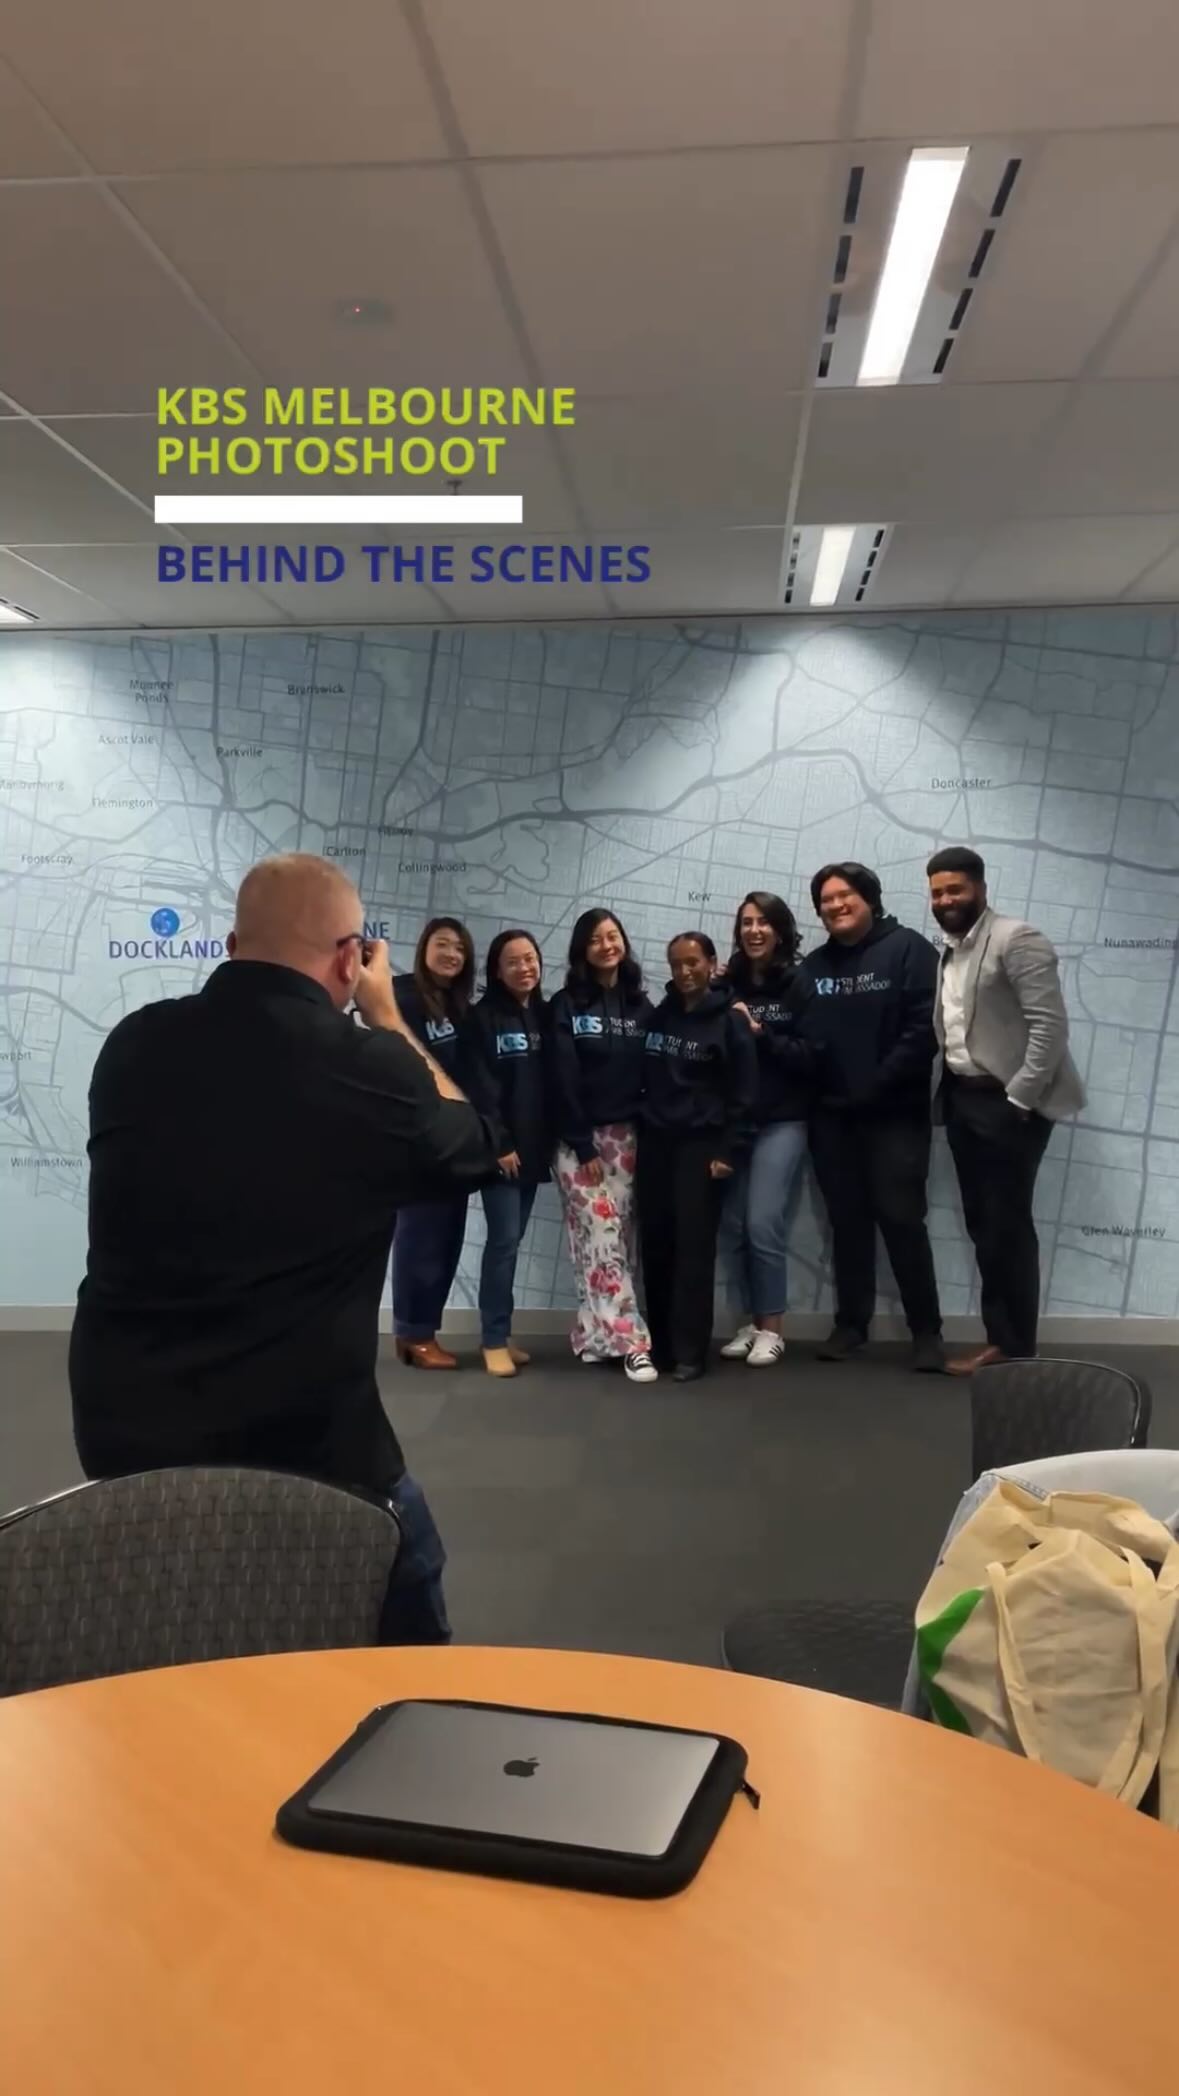 📸🎬 That’s a wrap! Check out some behind-the-scenes from the photoshoot at our Melbourne campus. Thank you to all our amazing students and staff for making it happen! 🙌🏻
#bts #kbsmelbourne #studykbs